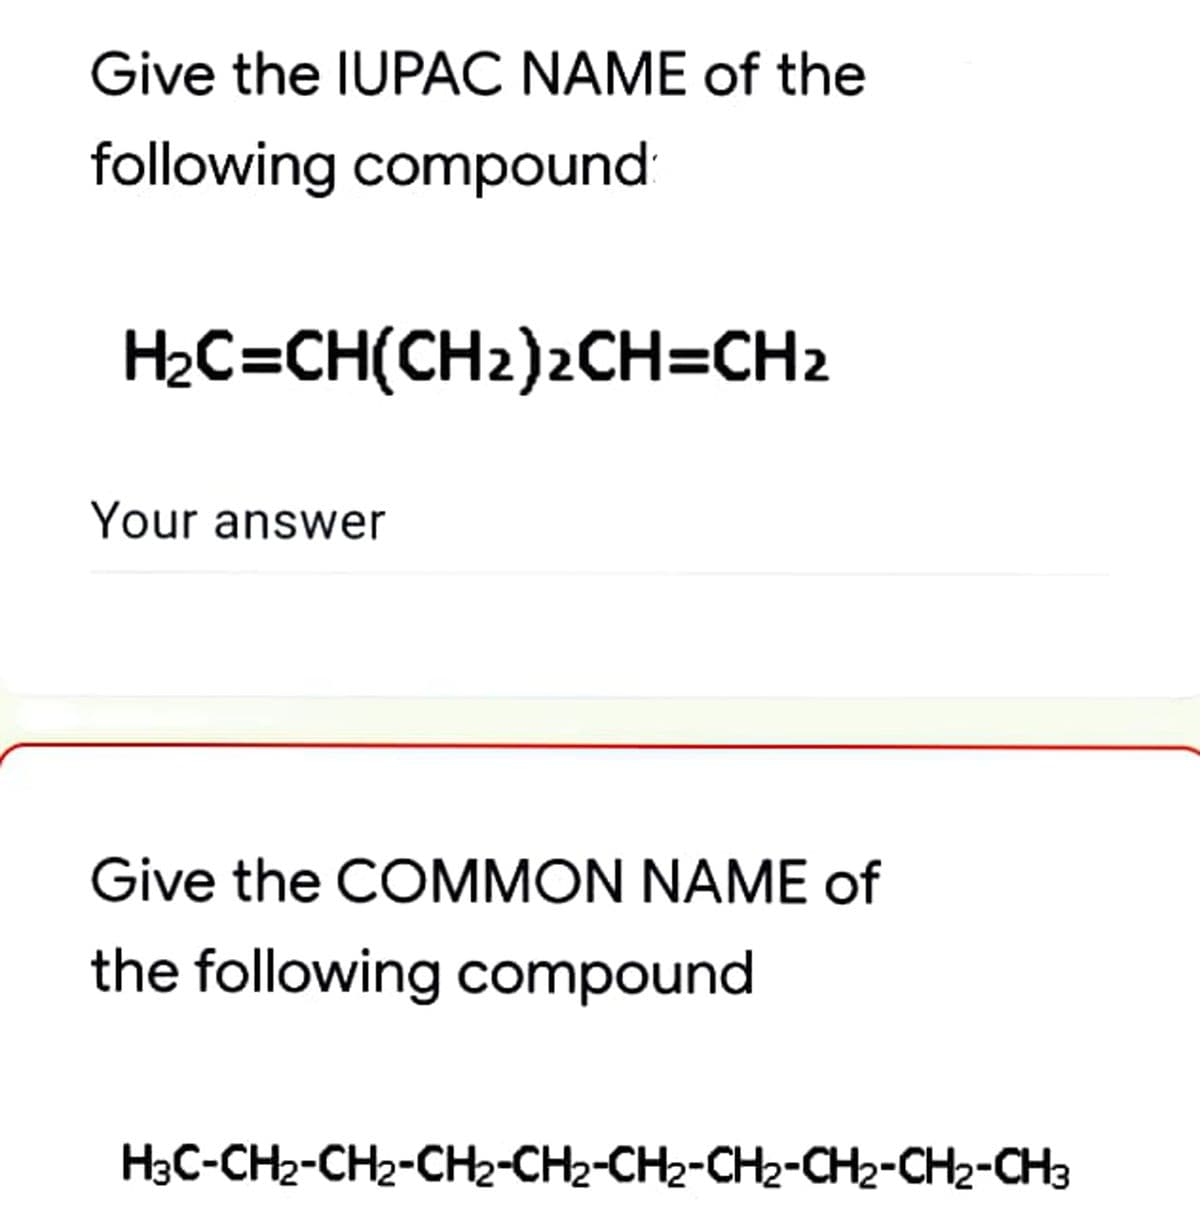 Give the IUPAC NAME of the
following compound
H2C=CH(CH2)2CH=CH2
Your answer
Give the COMMON NAME of
the following compound
H3C-CH2-CH2-CH2-CH2-CH2-CH2-CH2-CH2-CH3
